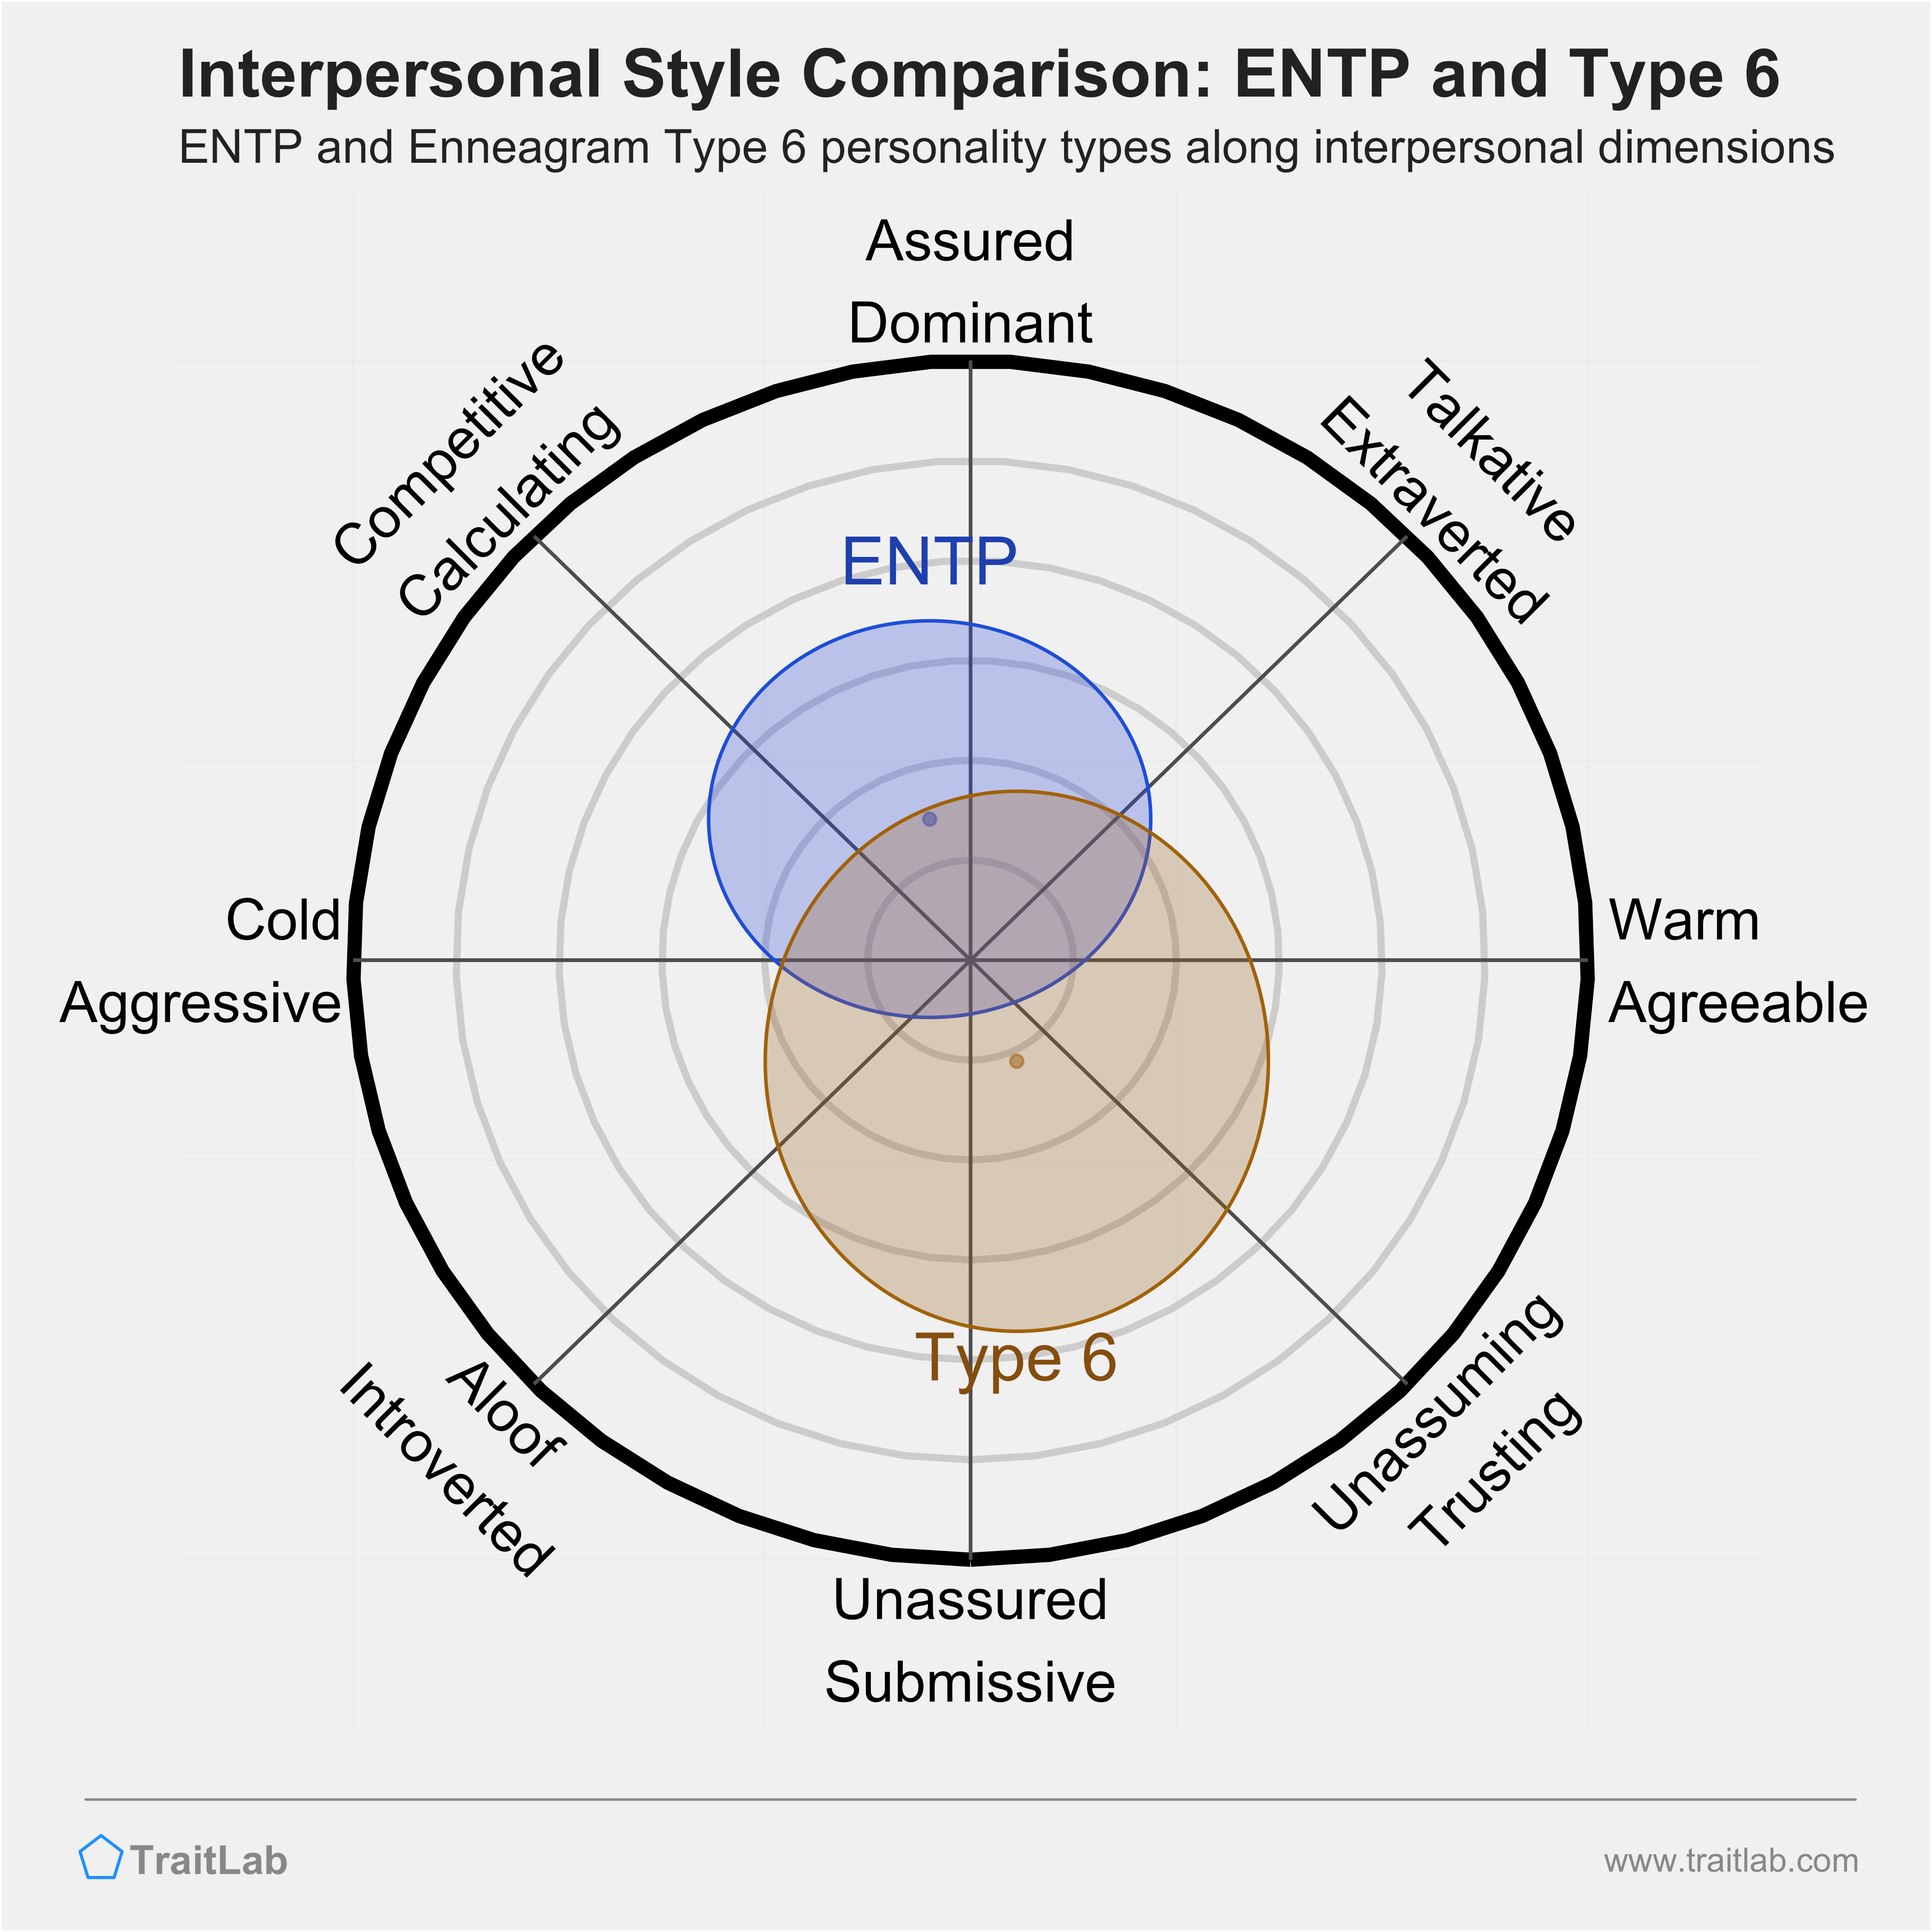 Enneagram ENTP and Type 6 comparison across interpersonal dimensions